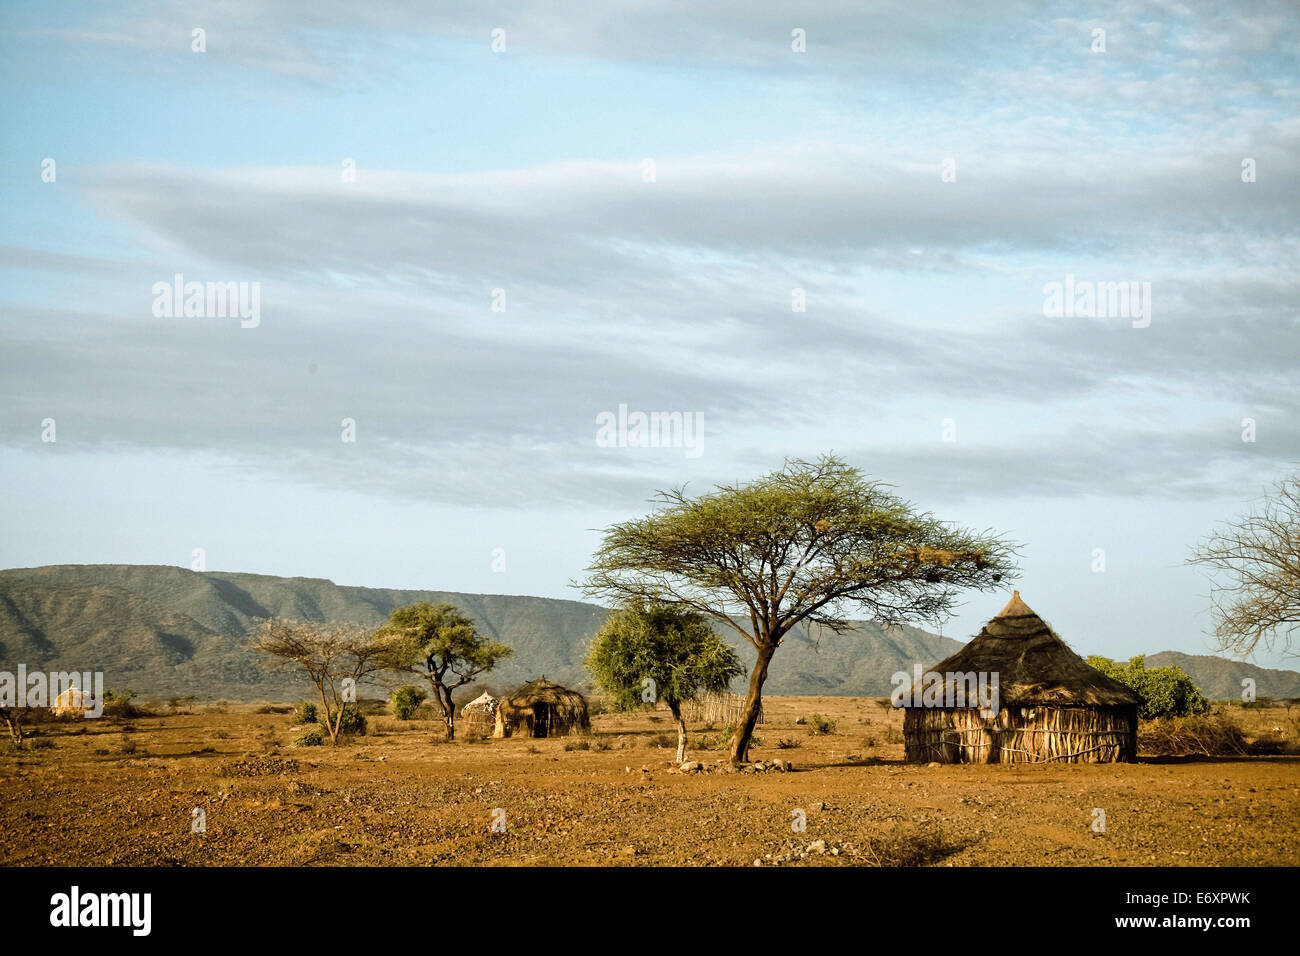 Round huts in bare savanne, Omo valley, South Ethiopia, Africa Stock Photo